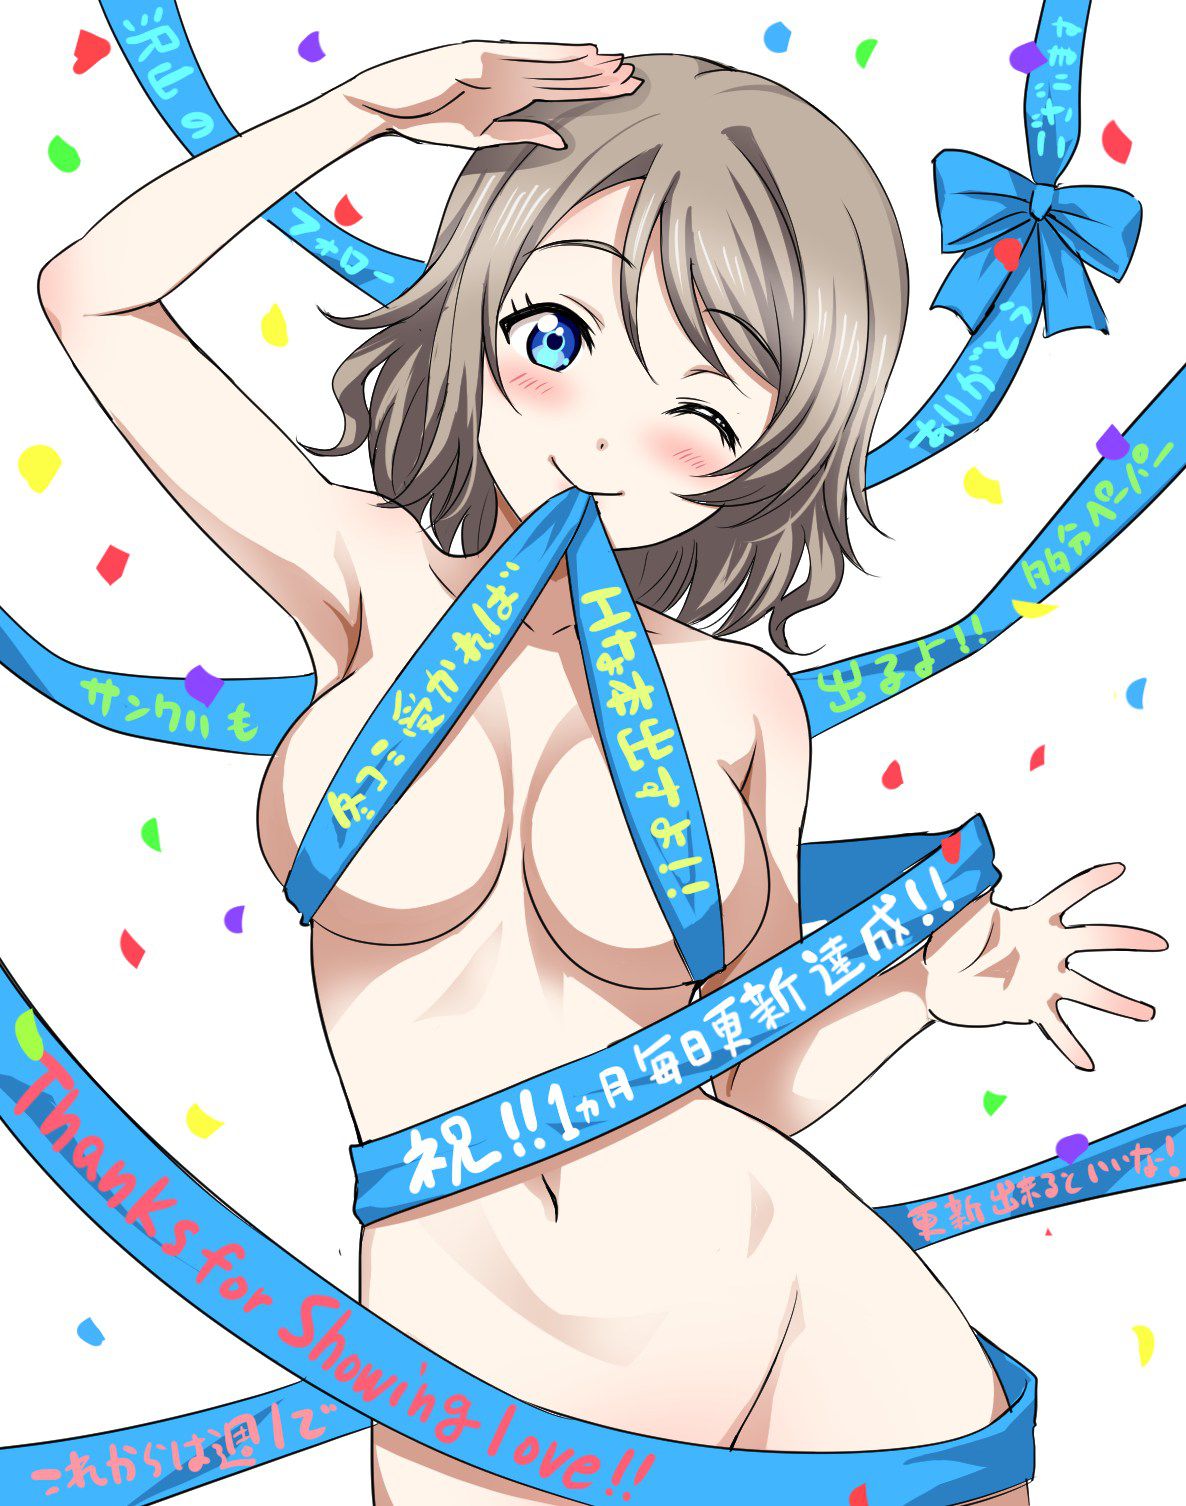 Love Live, Sunshine! Watanabe, Ken (Watanabe) Erotic pictures and Moe image Part 7 11